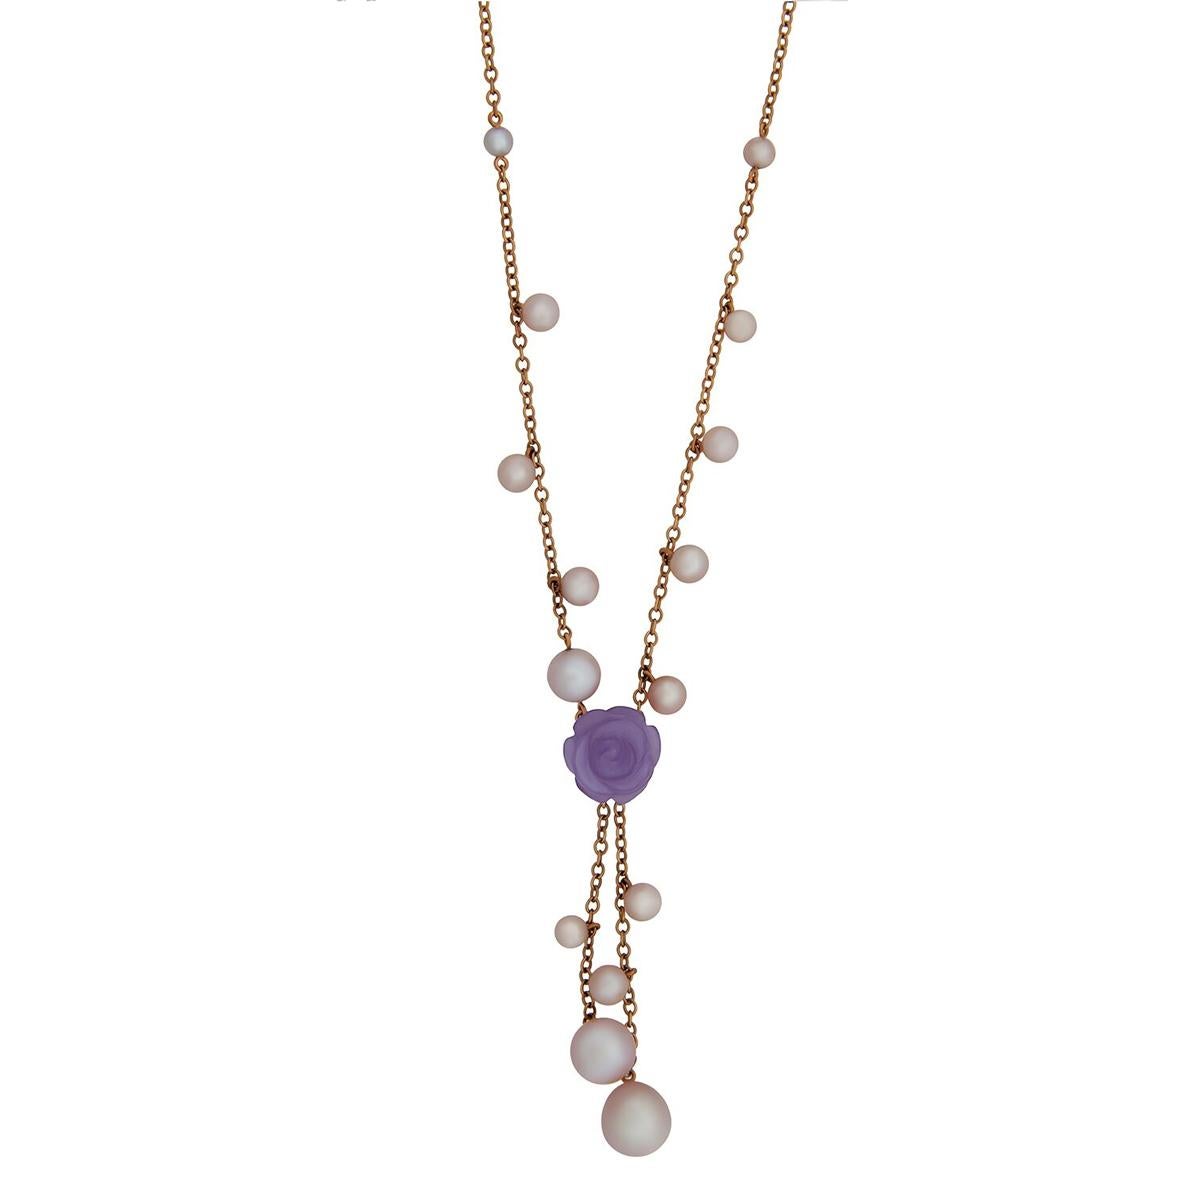 A chic necklace by Mimi Milano featuring a 8.25ct lavender jade cut in the shape o a flower surrounded by violet cultured freshwater pearls in 18k rose gold.